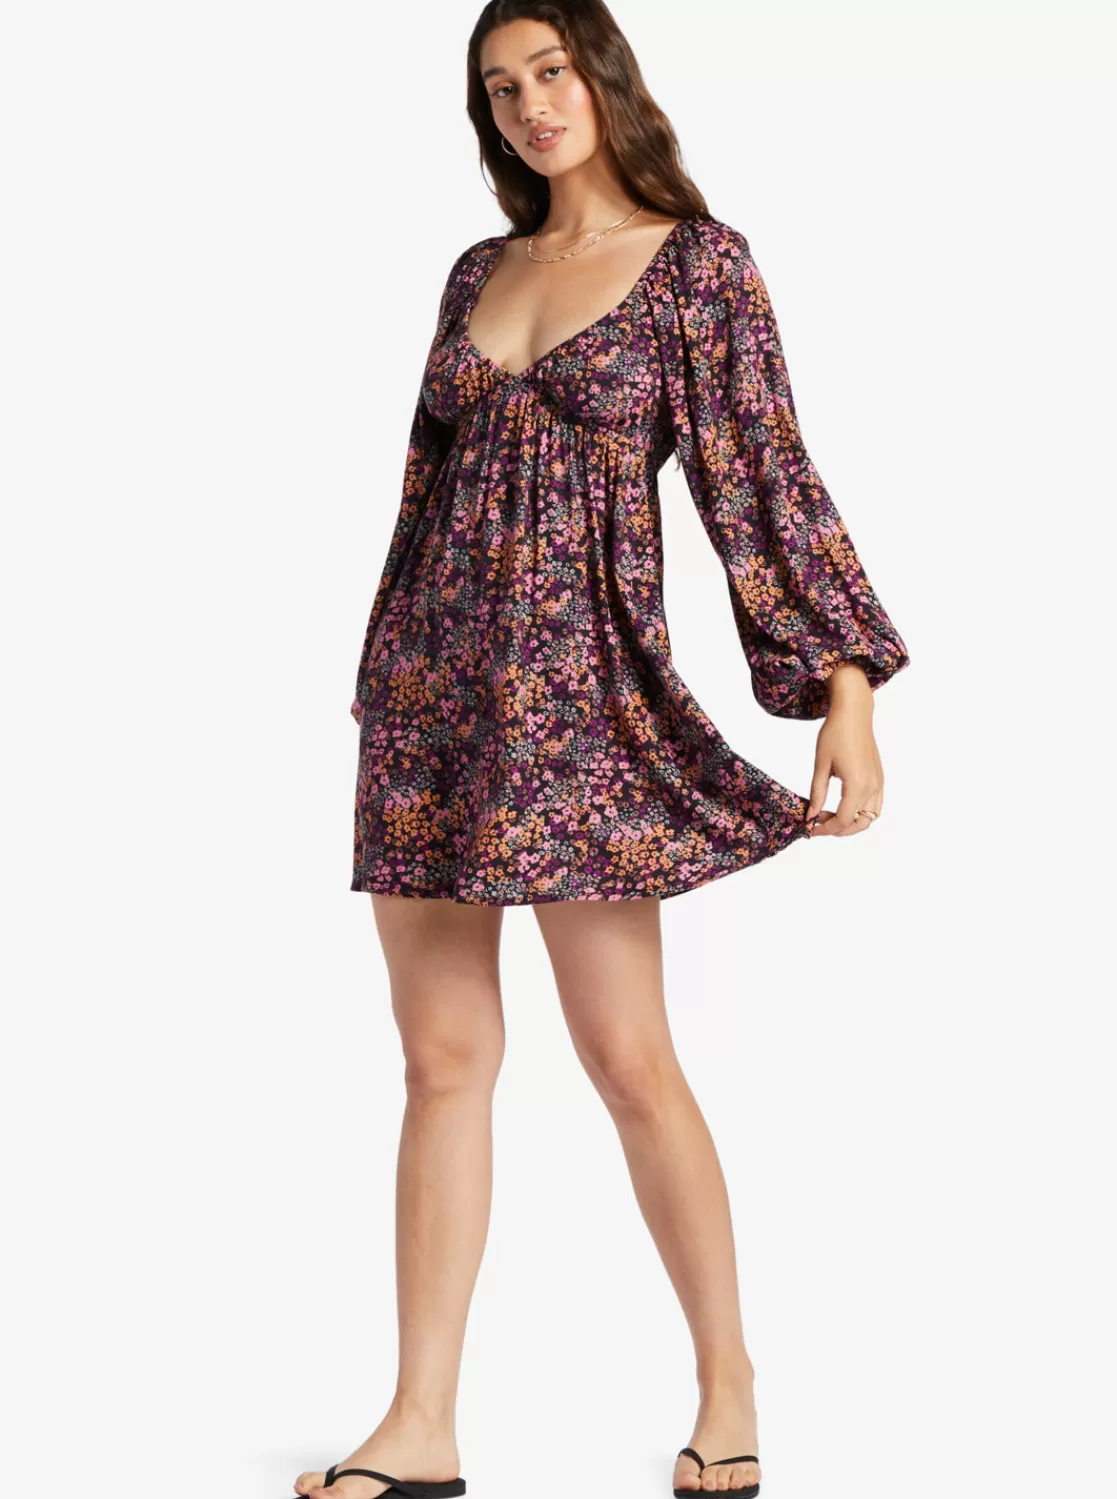 Sweetest Shores Puff Sleeve Dress-ROXY Store